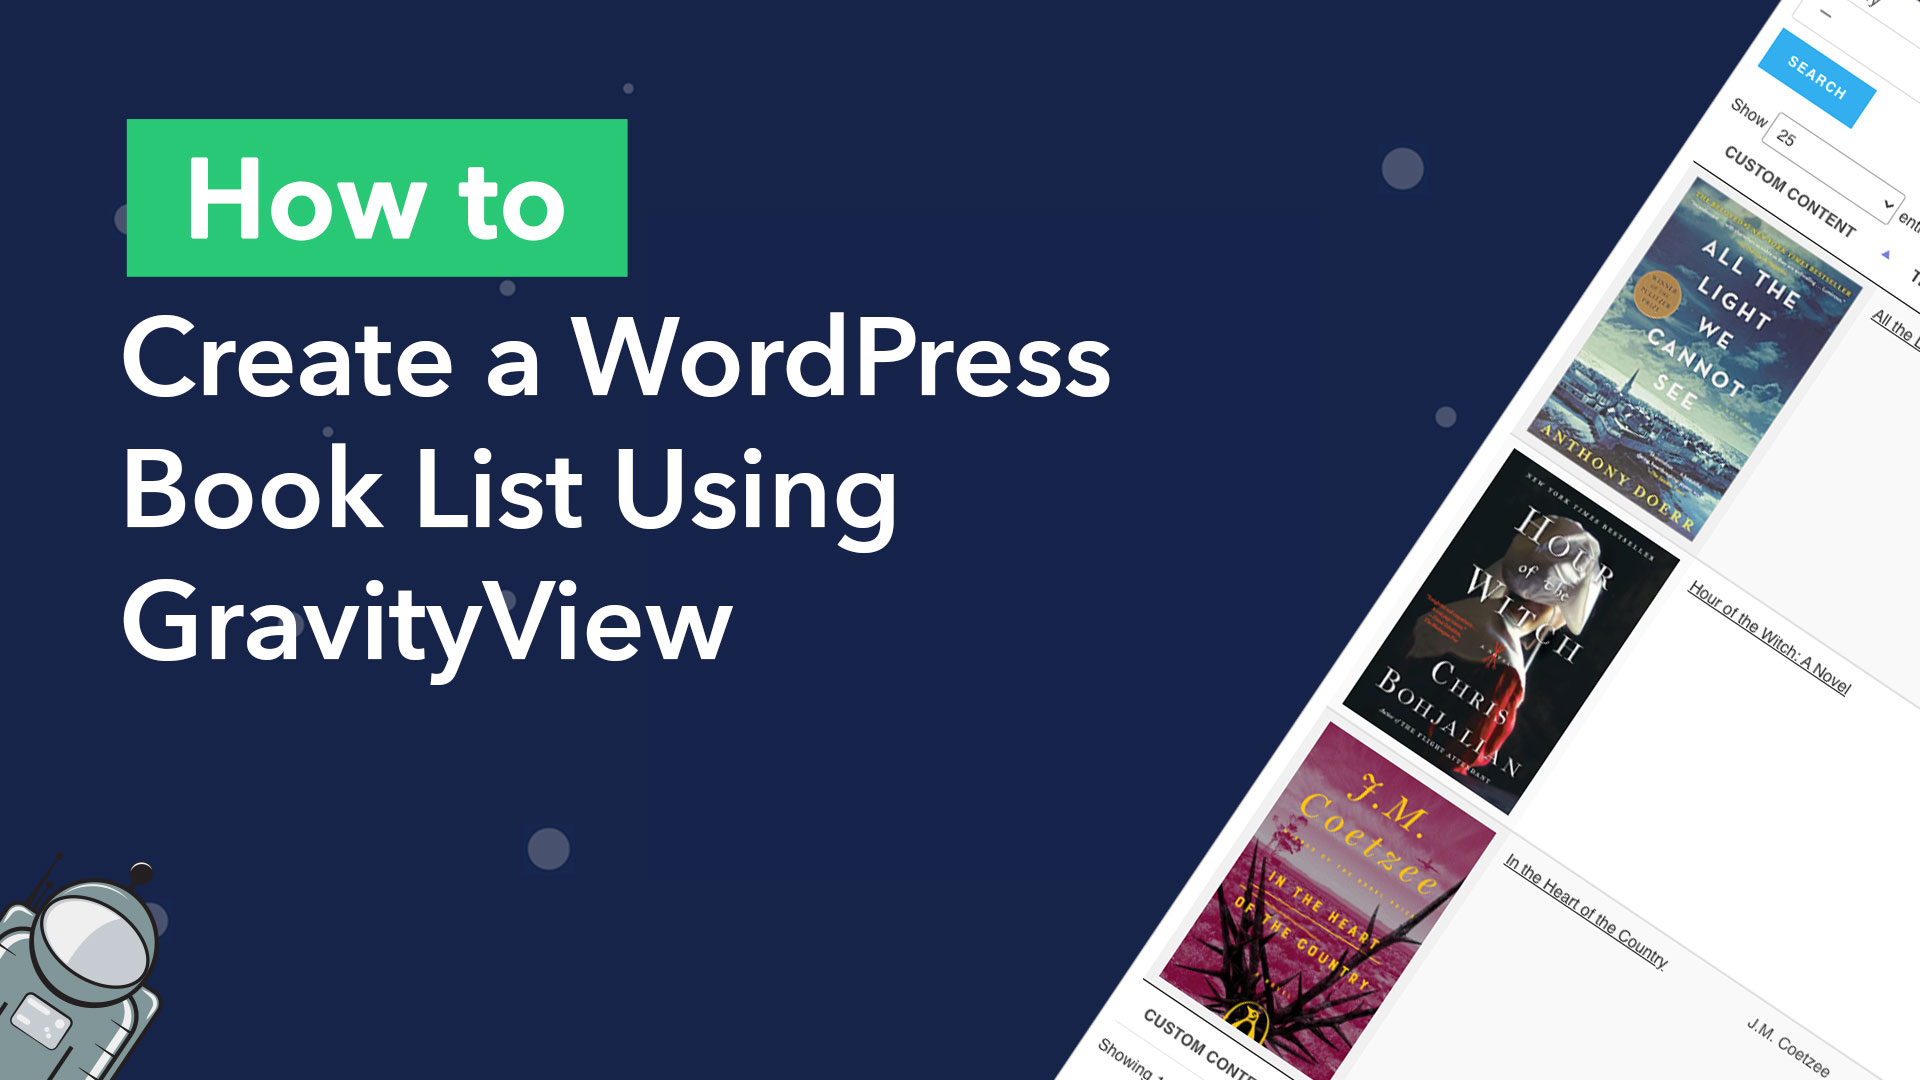 How to create a WordPress book list using GravityView